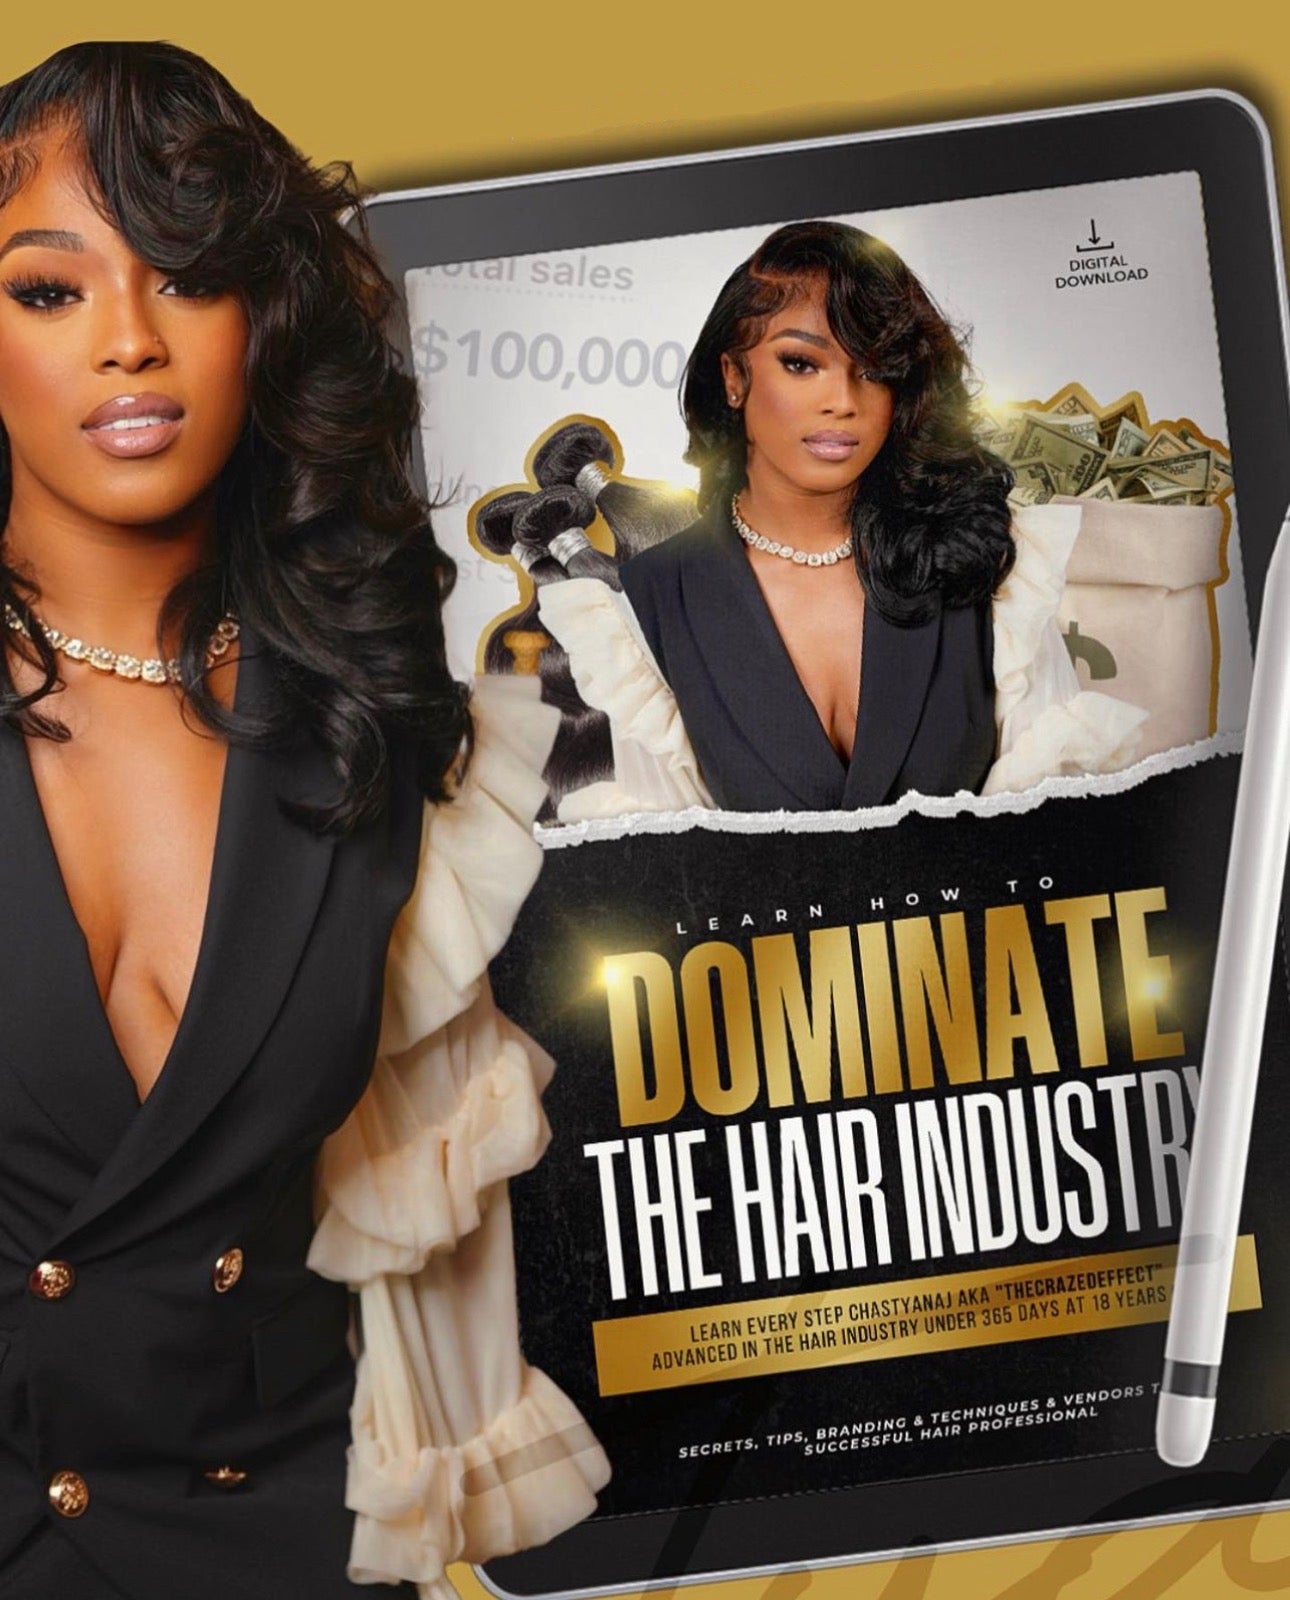 How To Dominate The Hair Industry Ebook